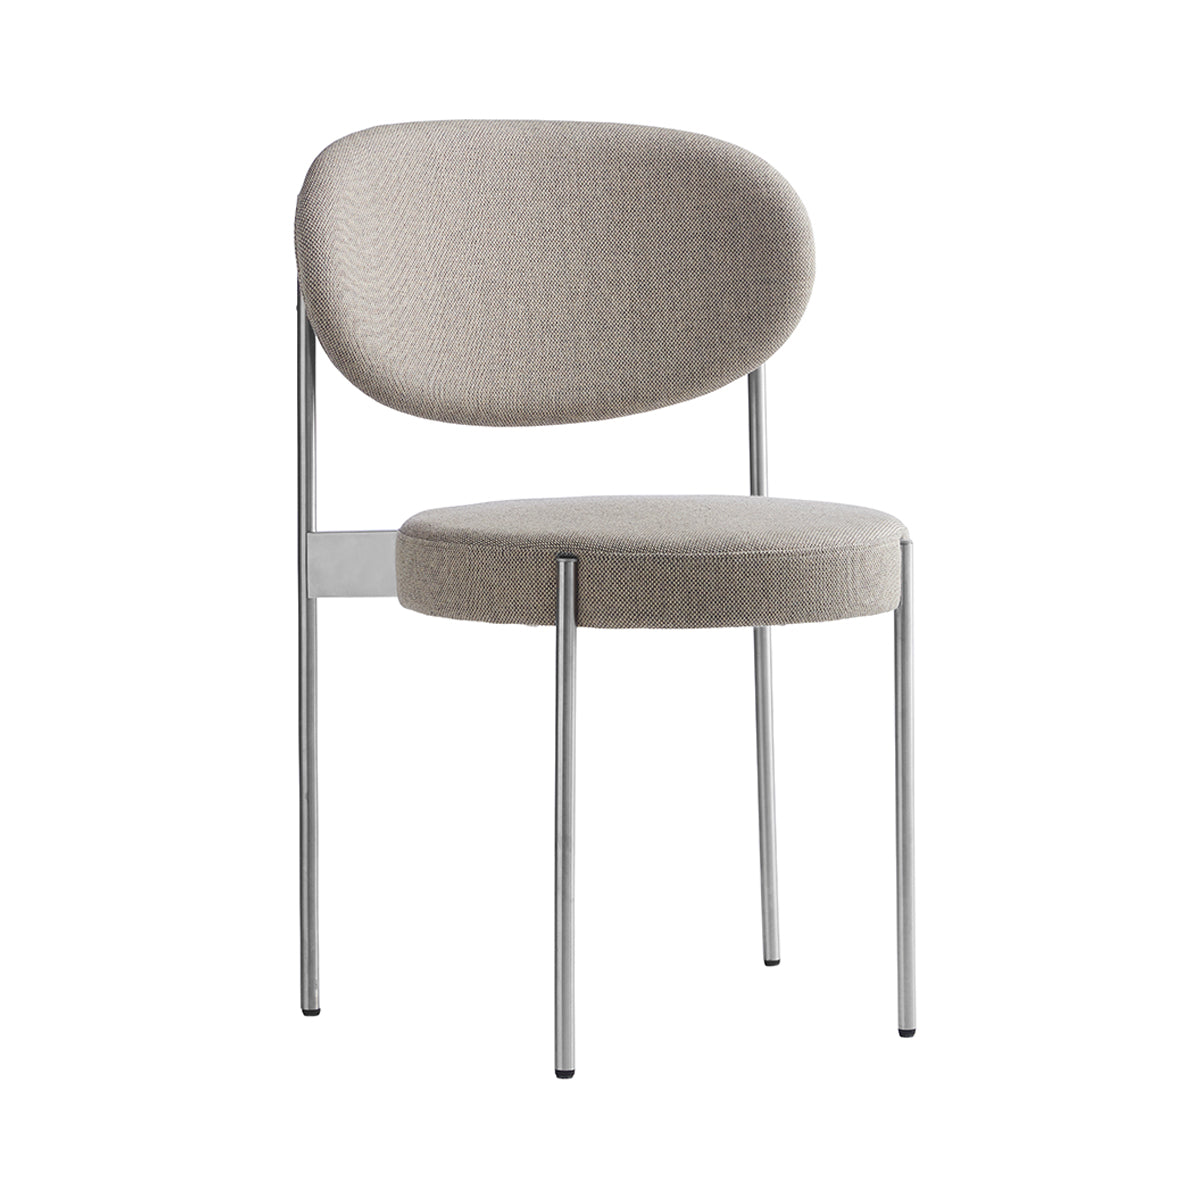 Series 430 Chair: Brushed Stainless Steel